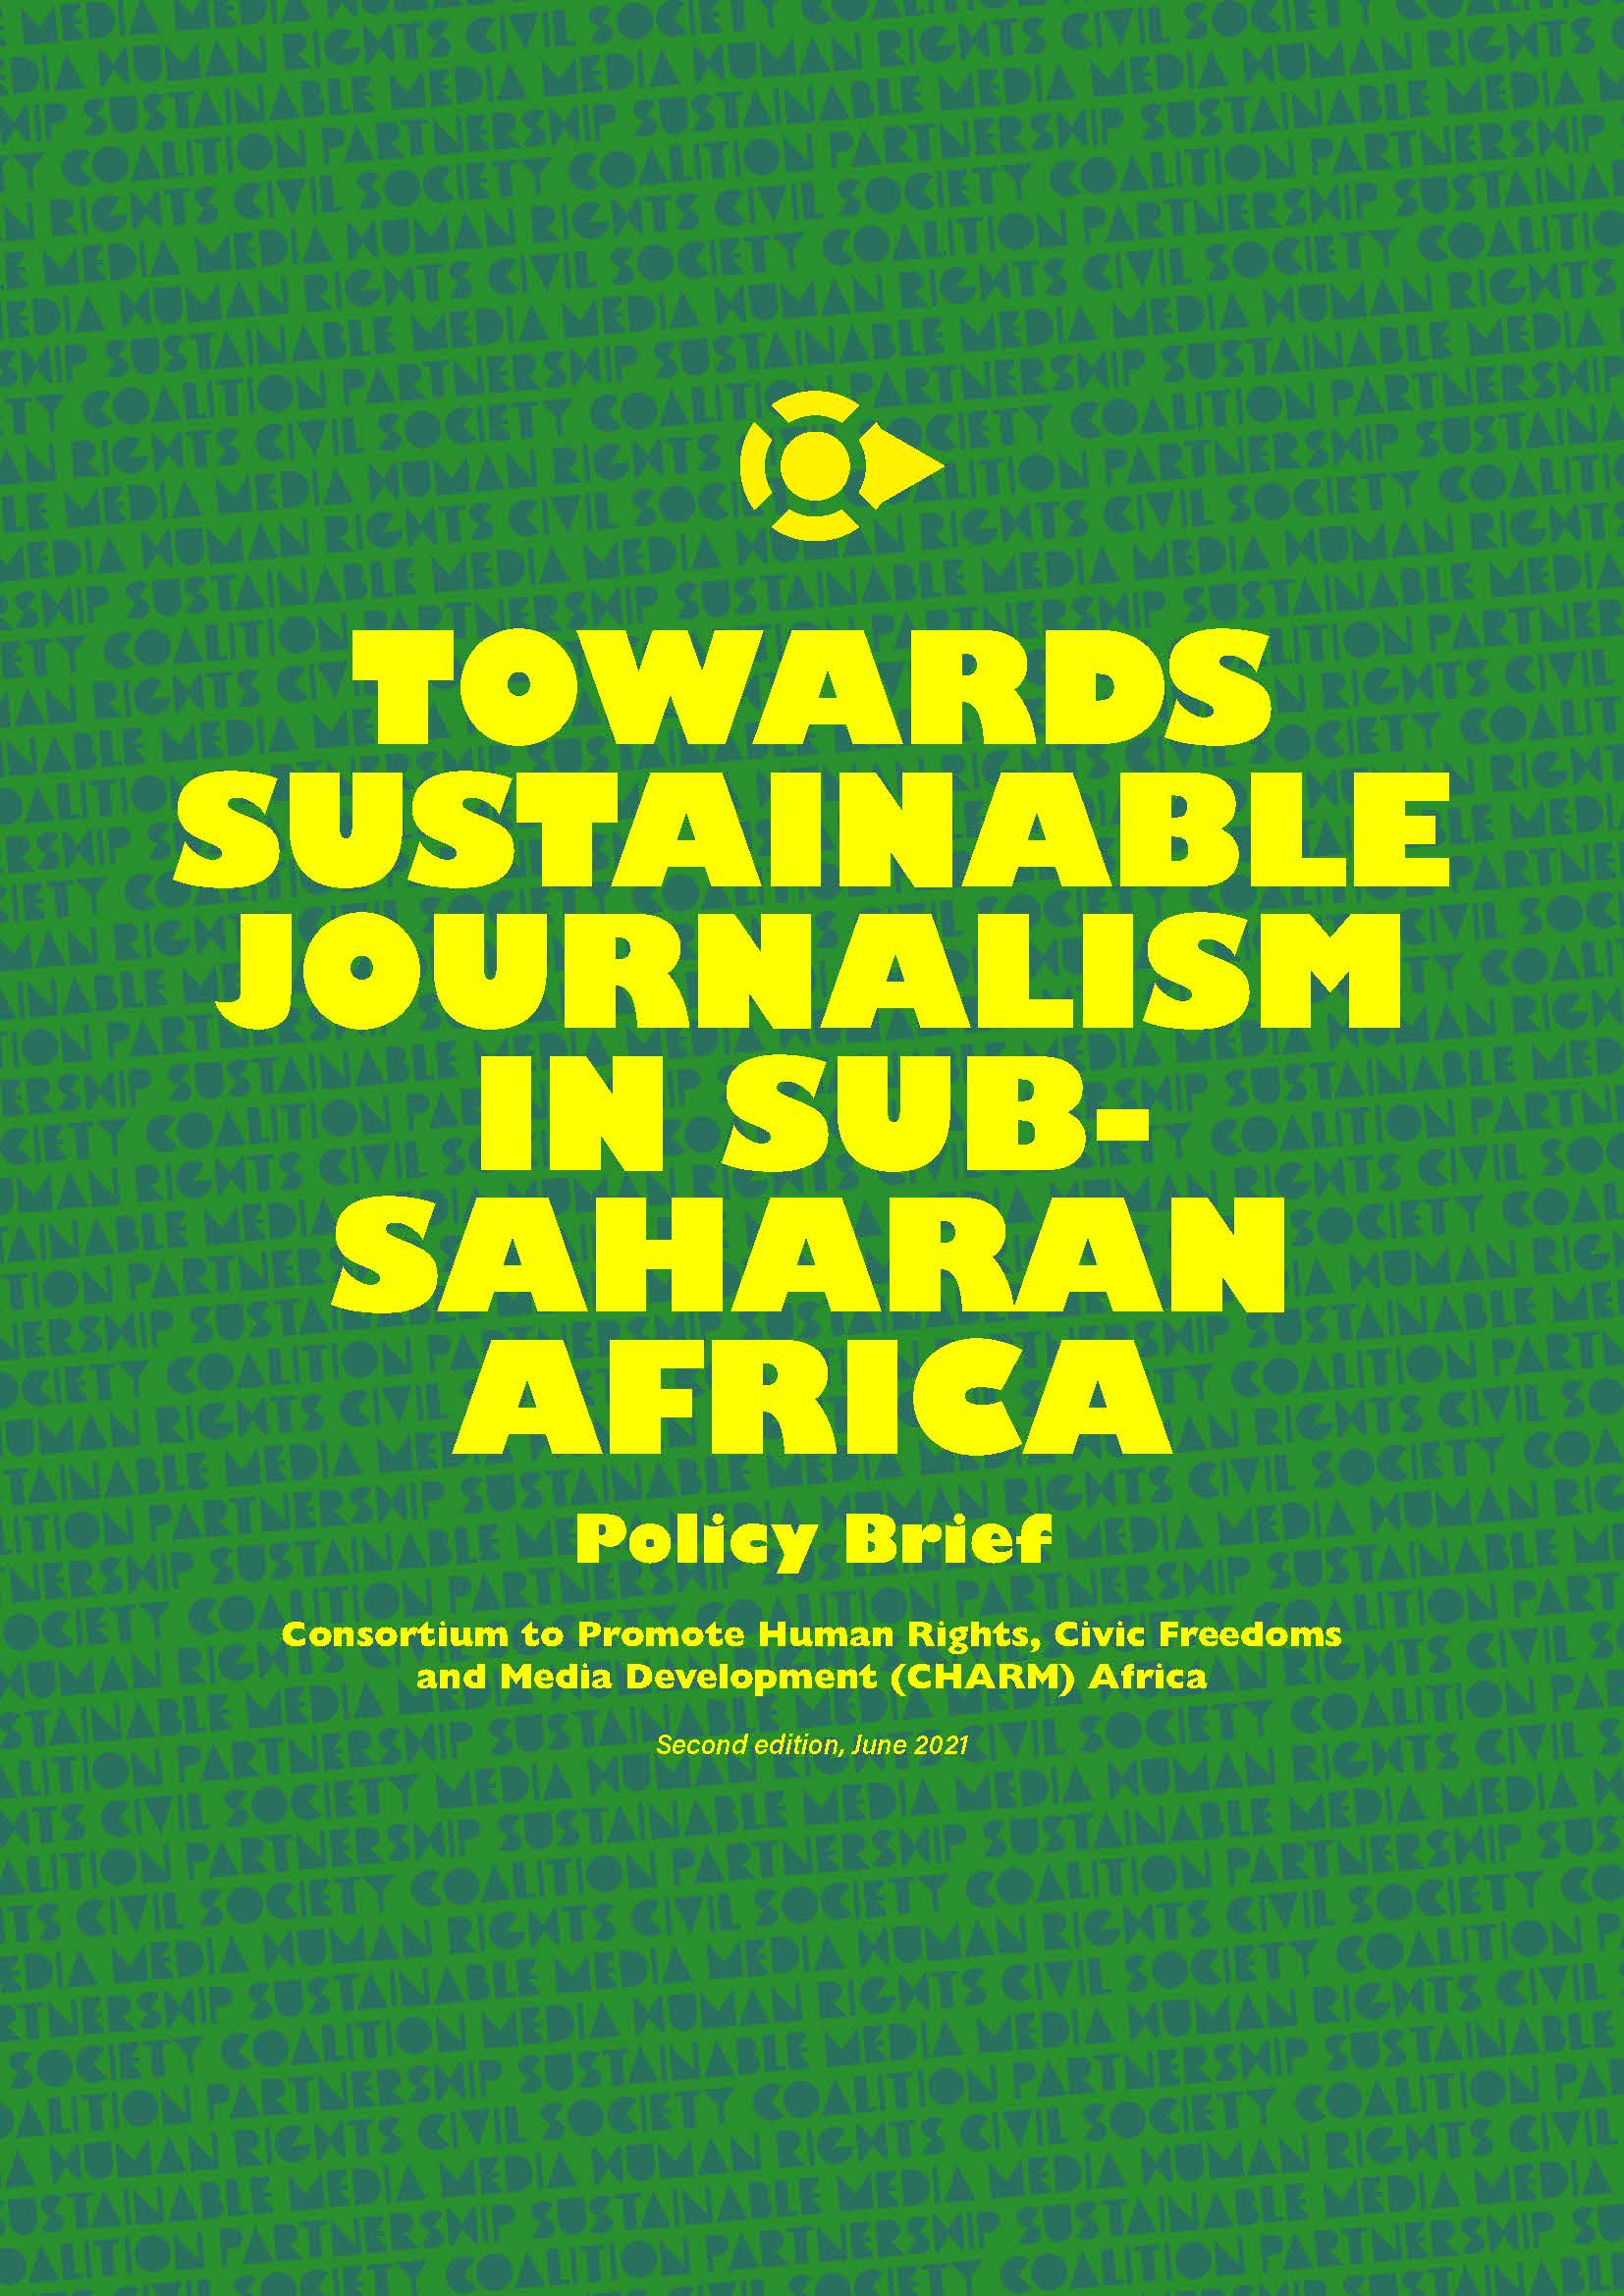 Towards Sustainable Journalism in Sub-Saharan Africa Policy Brief (written by Theodora Dame Adjin-Tettey, Anthea Garman, Franz Kruger, Ulrika Olausson, Peter Berglez, Lars Tallert, Guy Berger and Vilhelm Fritzon) funded by the Consortium to Promote Human Rights, Civic Freedoms and Media Development (CHARM) Africa